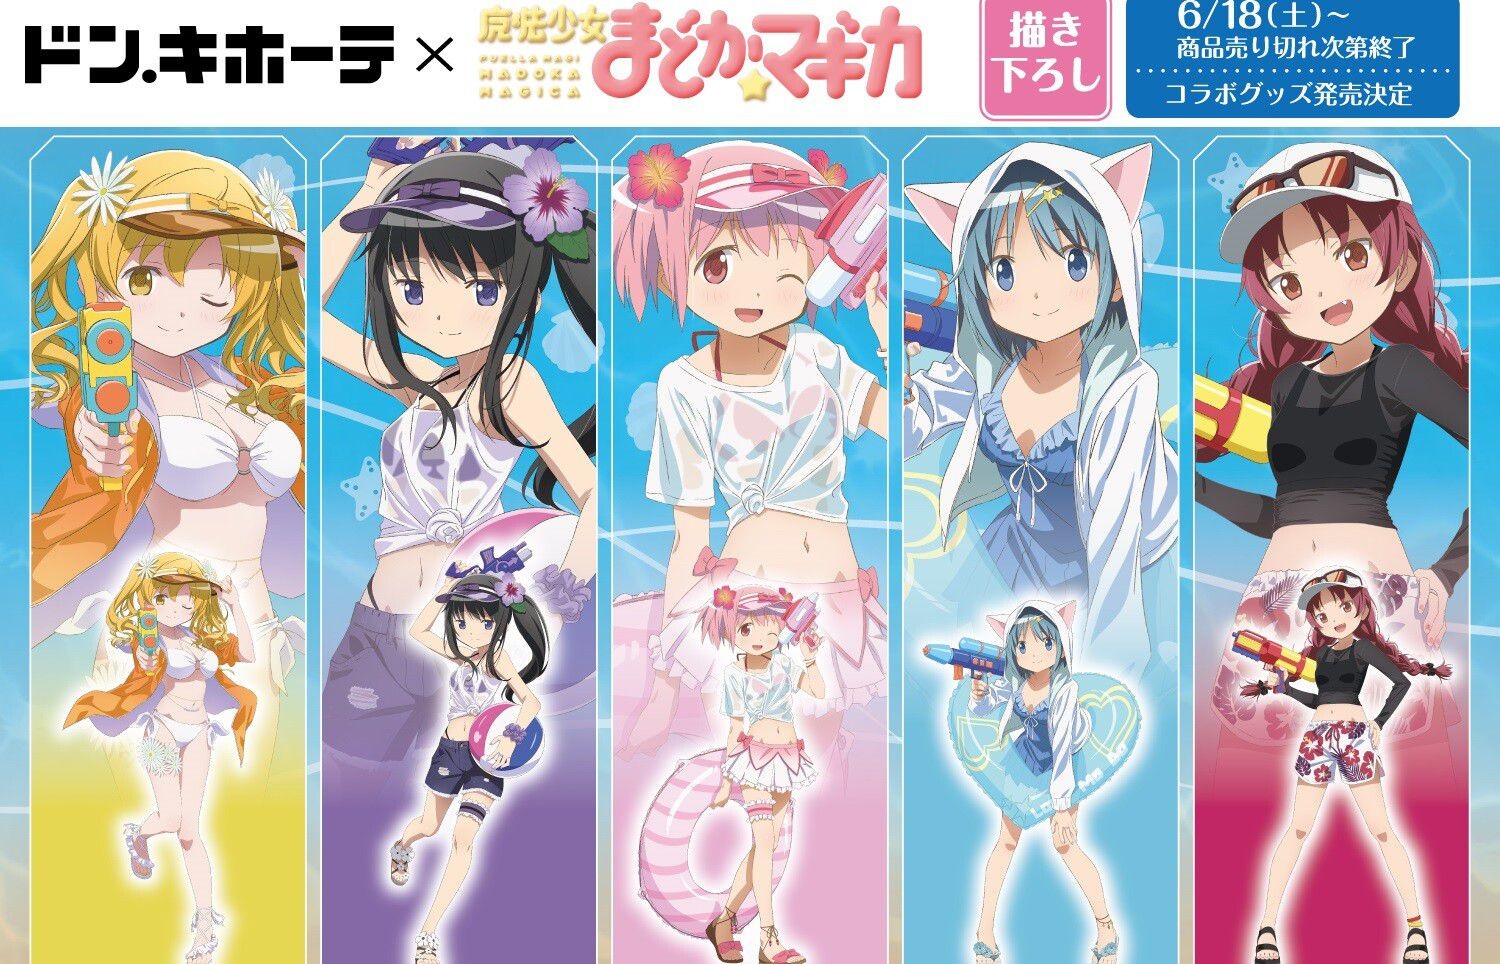 Best "Magical Girl Madoka ☆ Magica" Collaborated With Don Quixote And Erotic Goods In A Tight Swimsuit! Sex